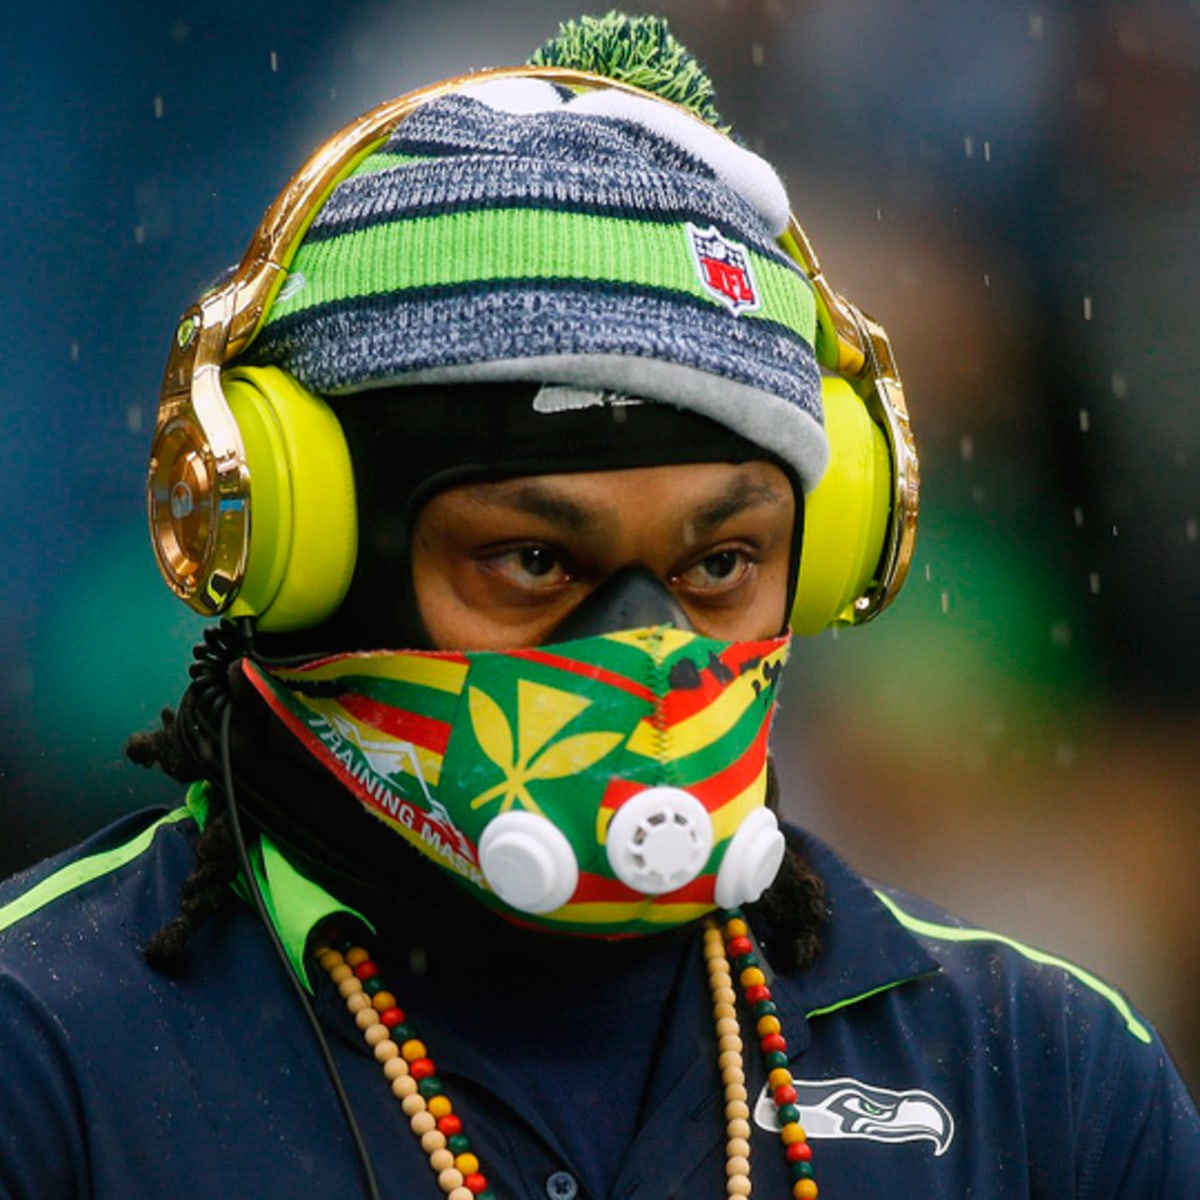 The story behind Marshawn Lynch's unique high-altitude training